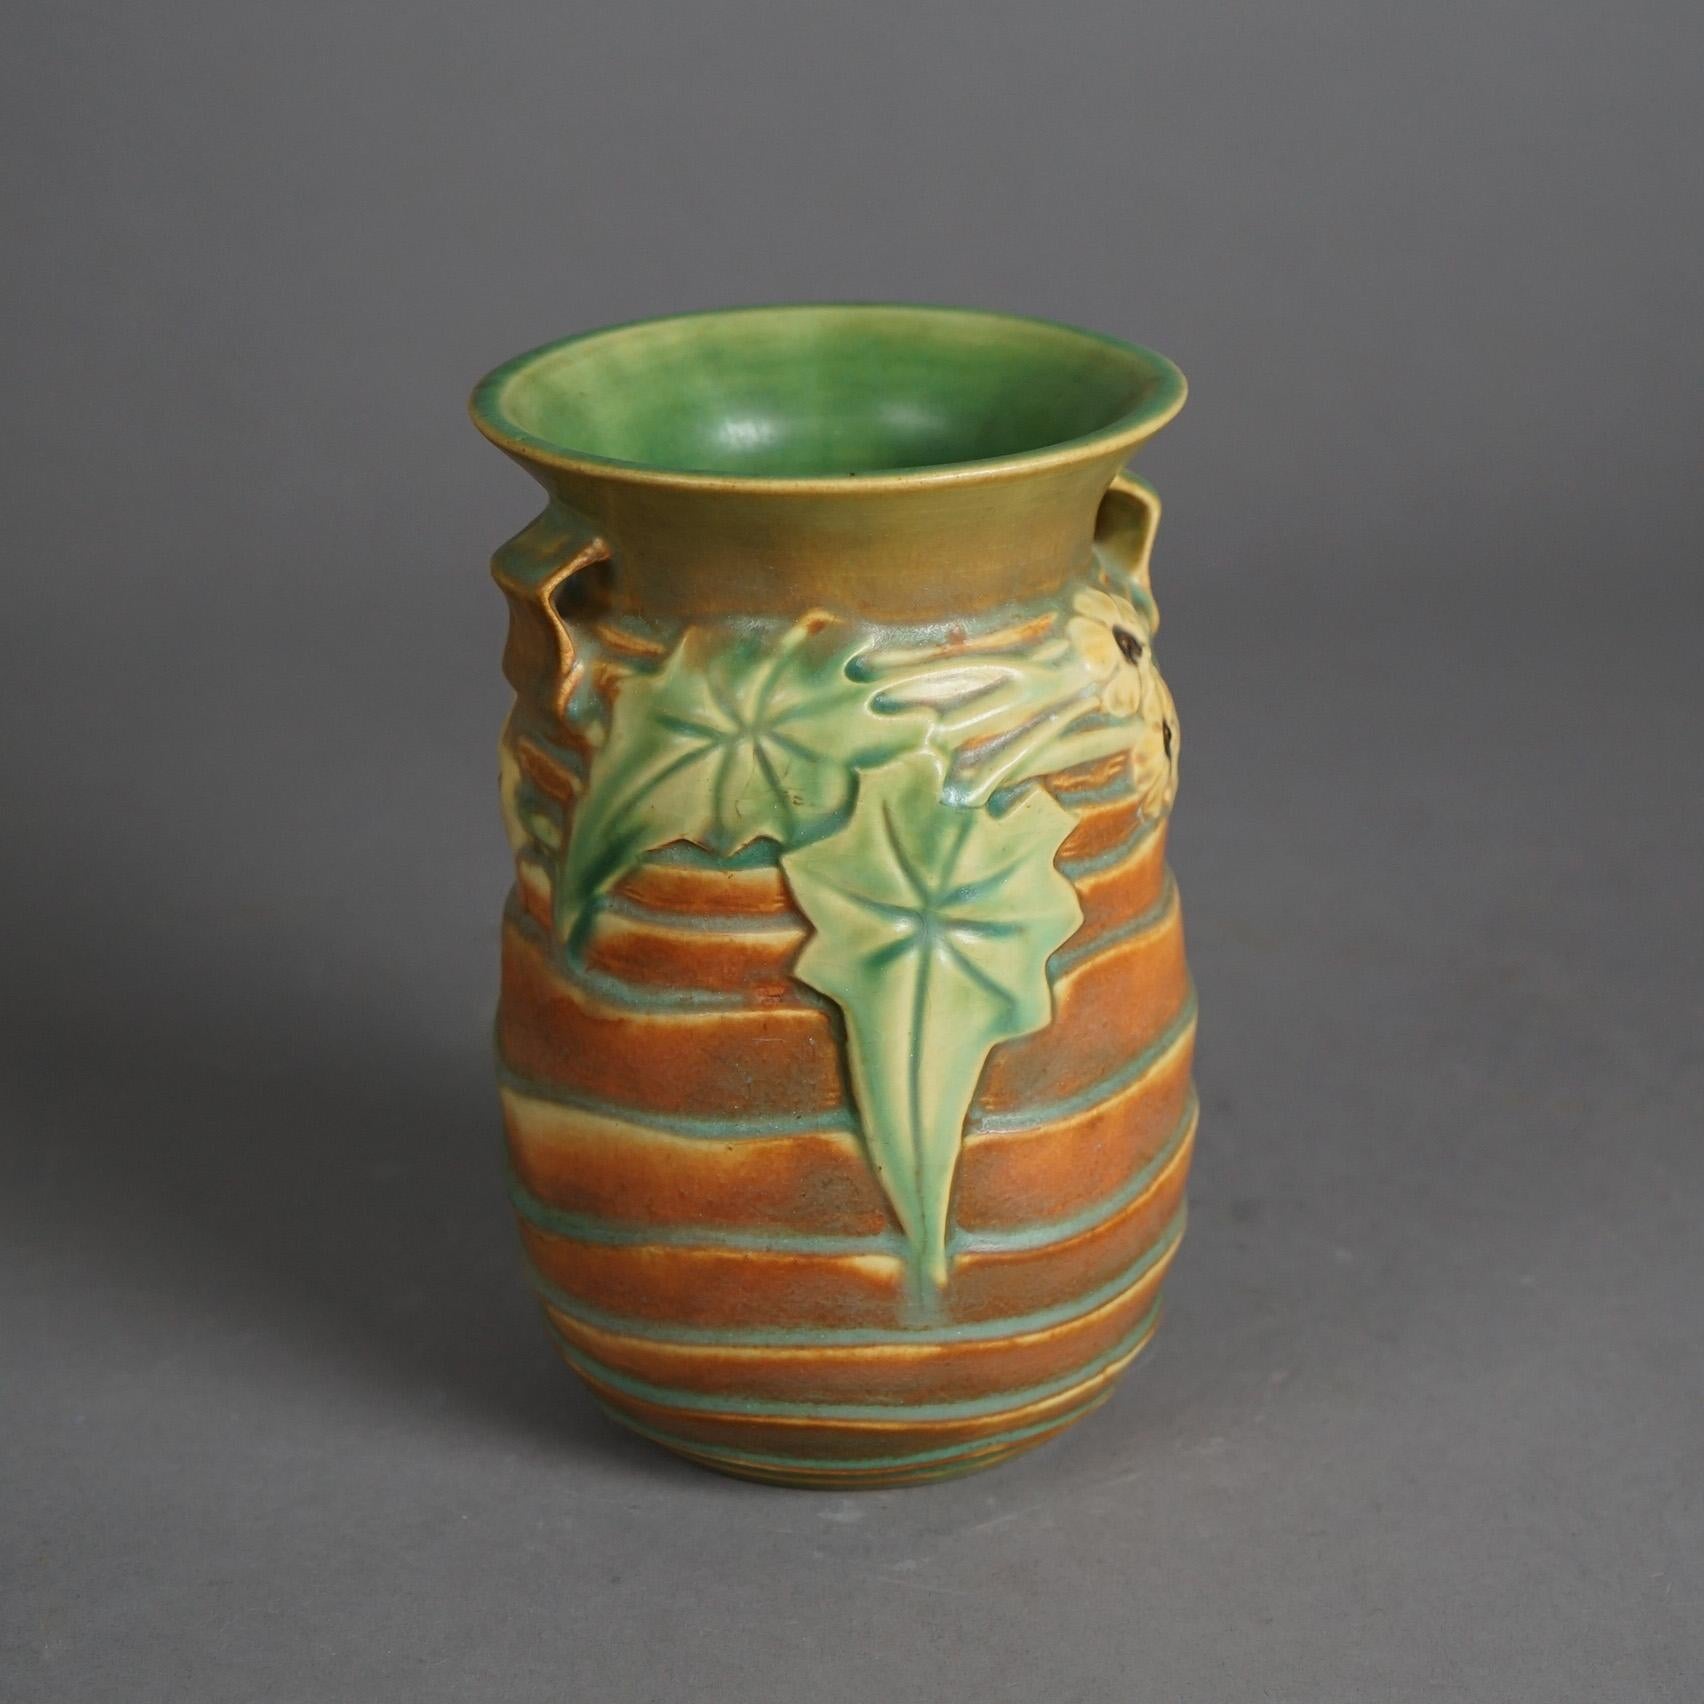 An Arts and Crafts Roseville vase offers art pottery construction in the Luffa pattern, maker label  on base as photographed, c1930

Measures- 7.5''H x 4.75''W x 4.75''D